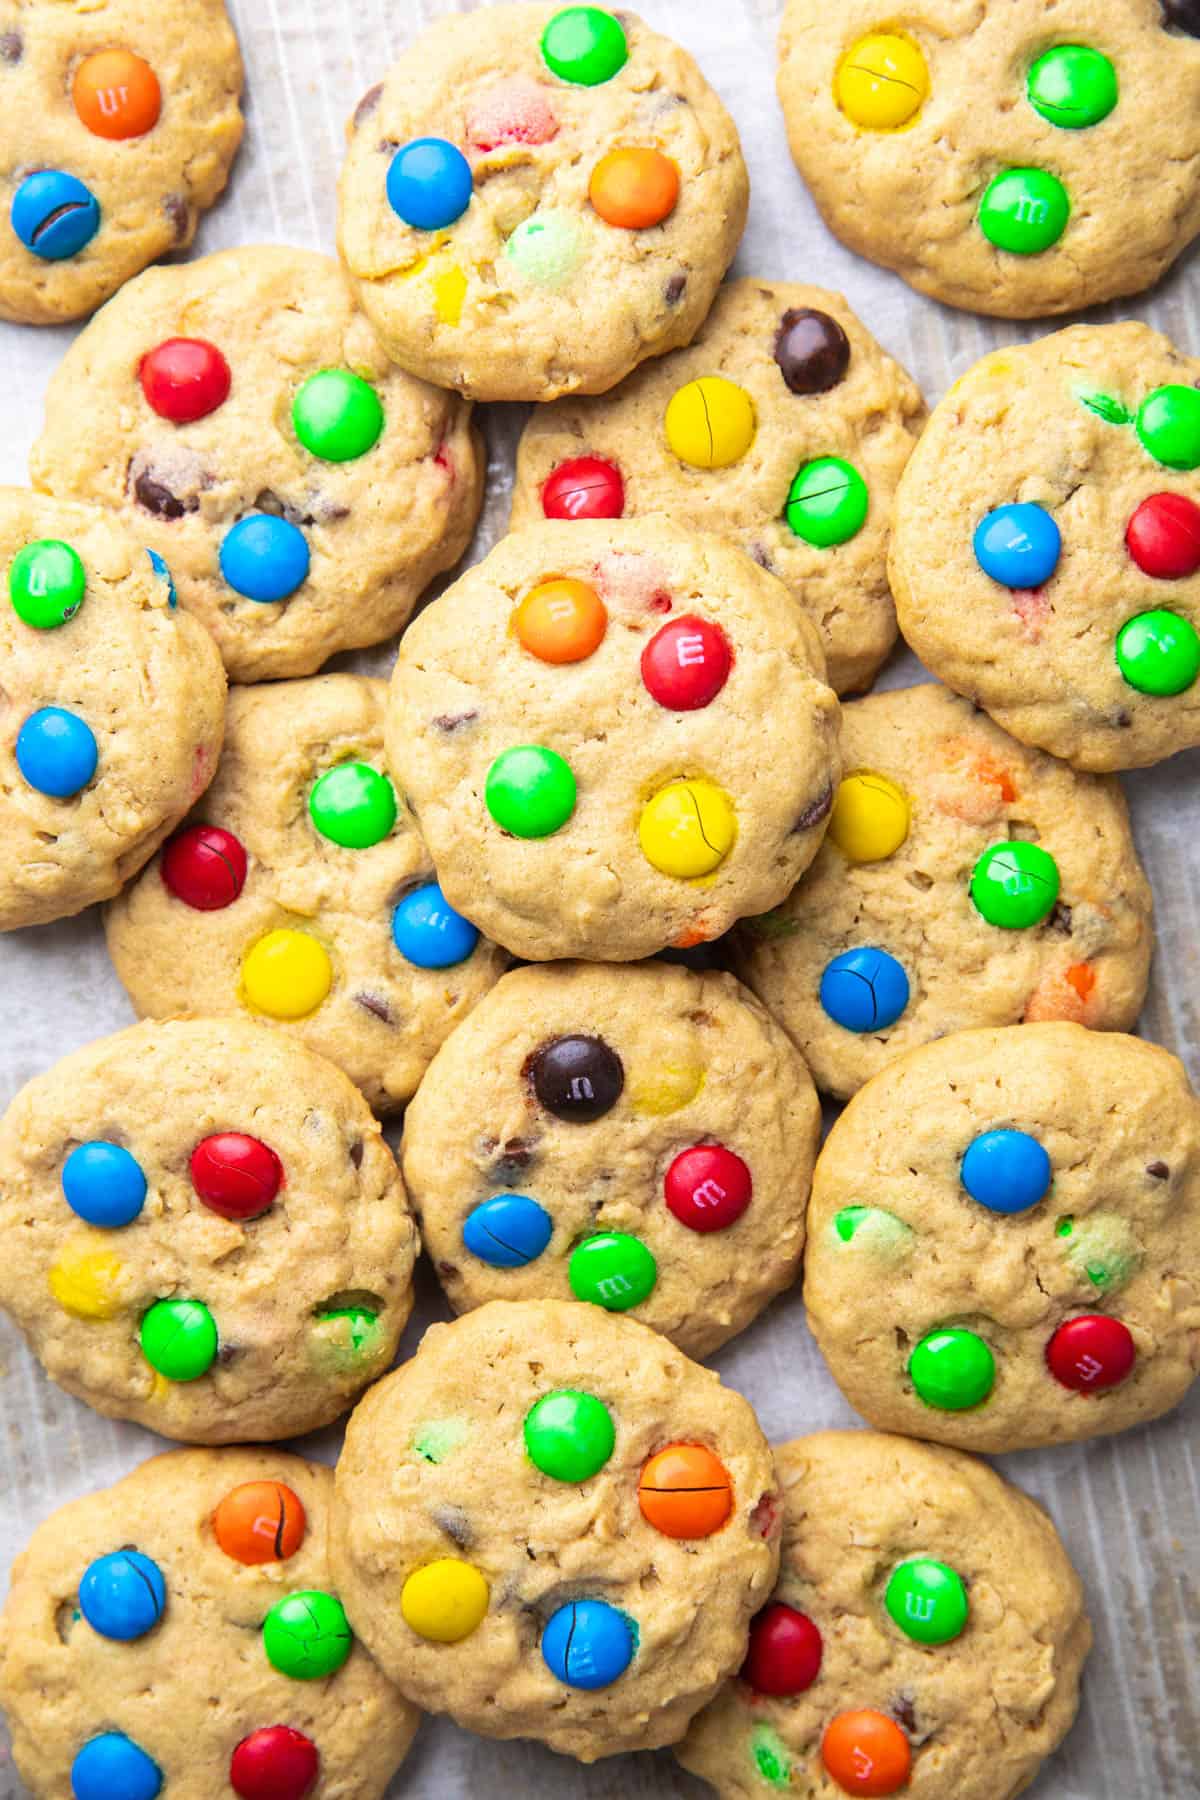 Cookies topped with M&Ms and chocolate chips.